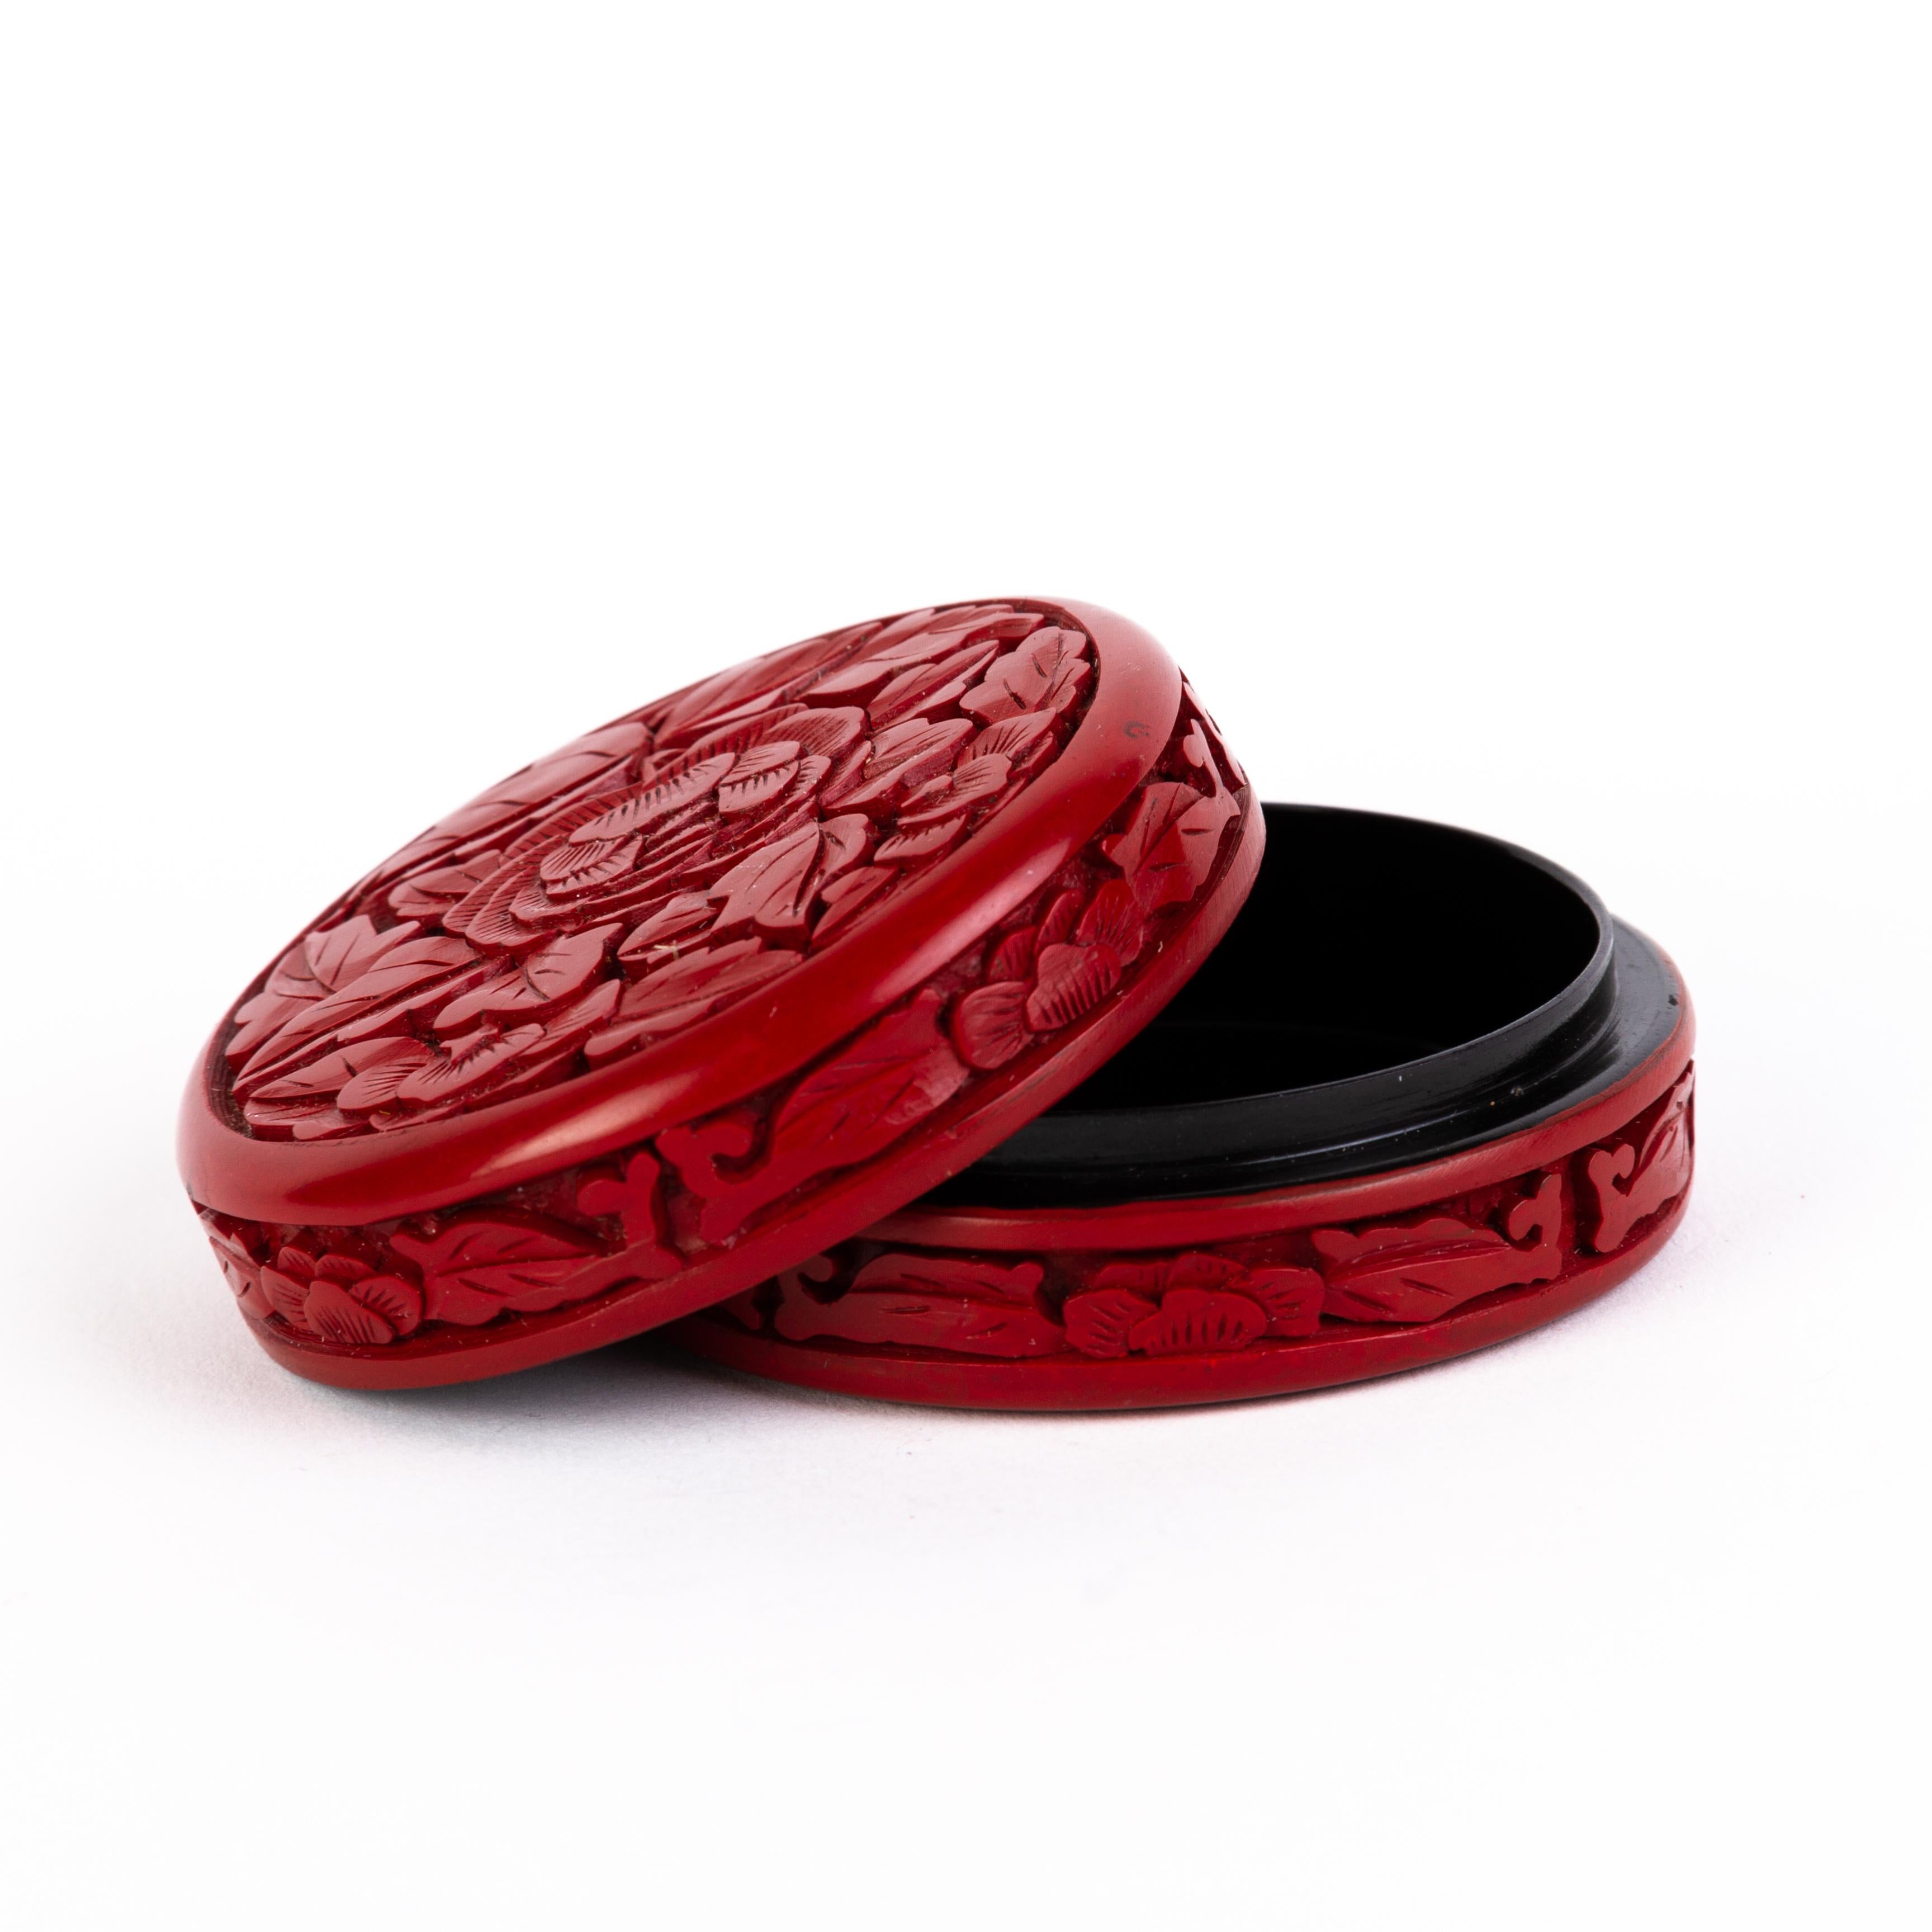 19th Century Chinese Qing Dynasty Carved Cinnabar Lacquer Circular Lidded Box circa 1900 For Sale